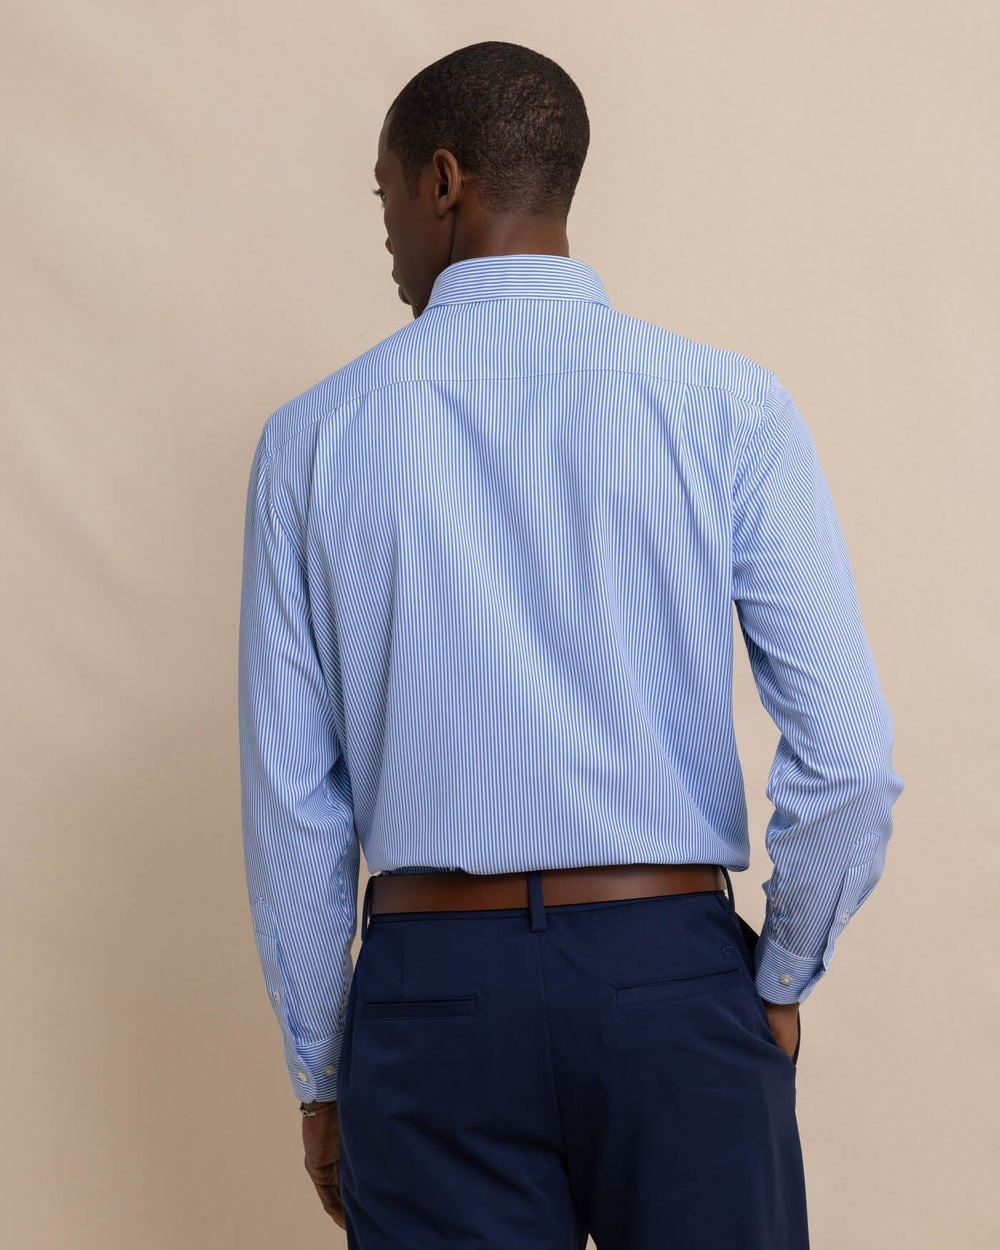 The back view of the Southern Tide Bengal Stripe brrr°® Intercoastal Sport Shirt by Southern Tide - Cobalt Blue